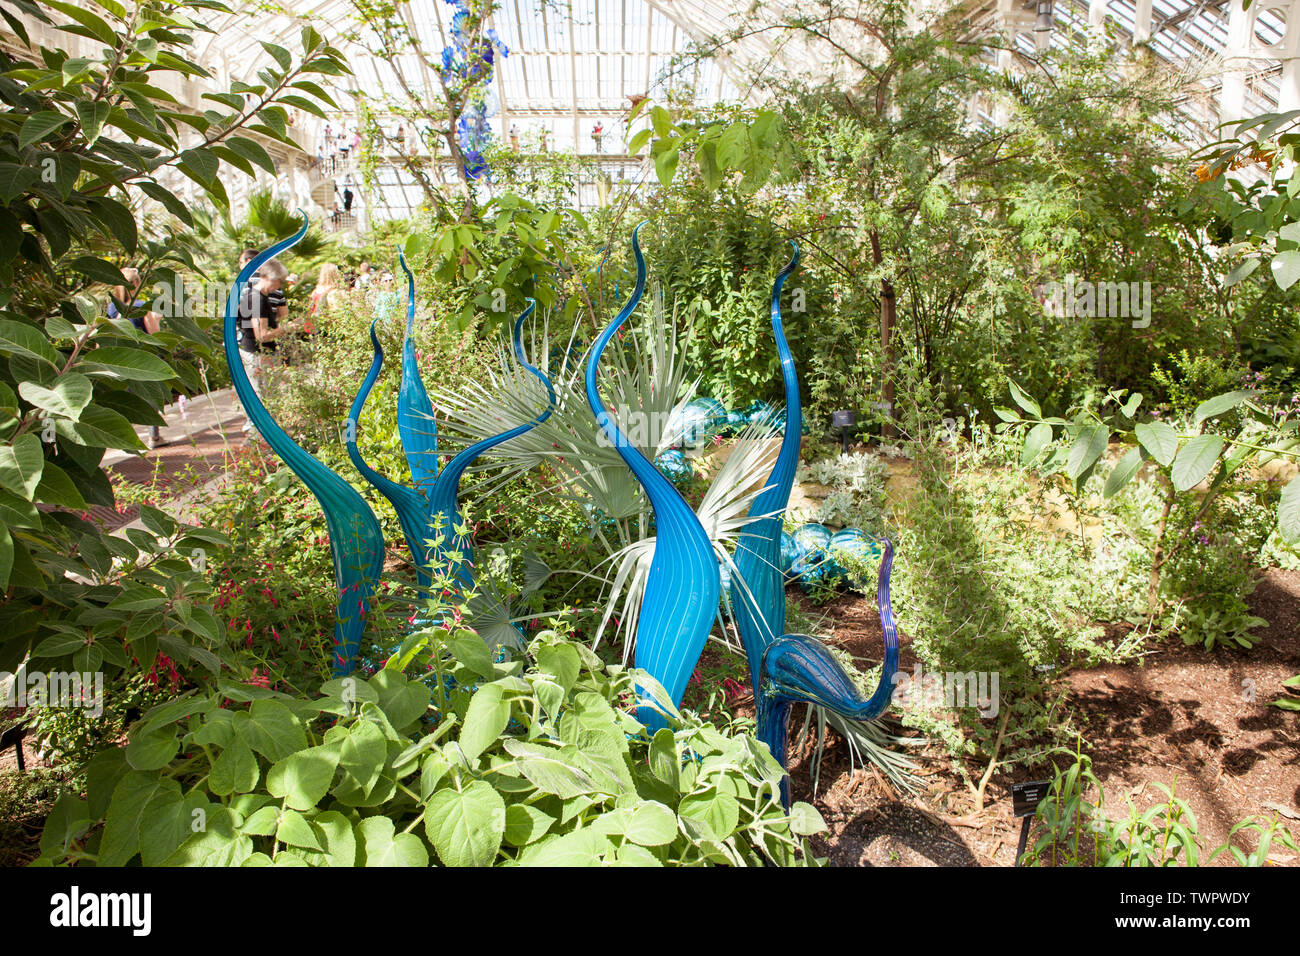 Turquoise Marlins and Floats is a glass sculpture by contemporary USA artist Dale Chihuly, located in The Temperate House at Kew Gardens, London. Stock Photo